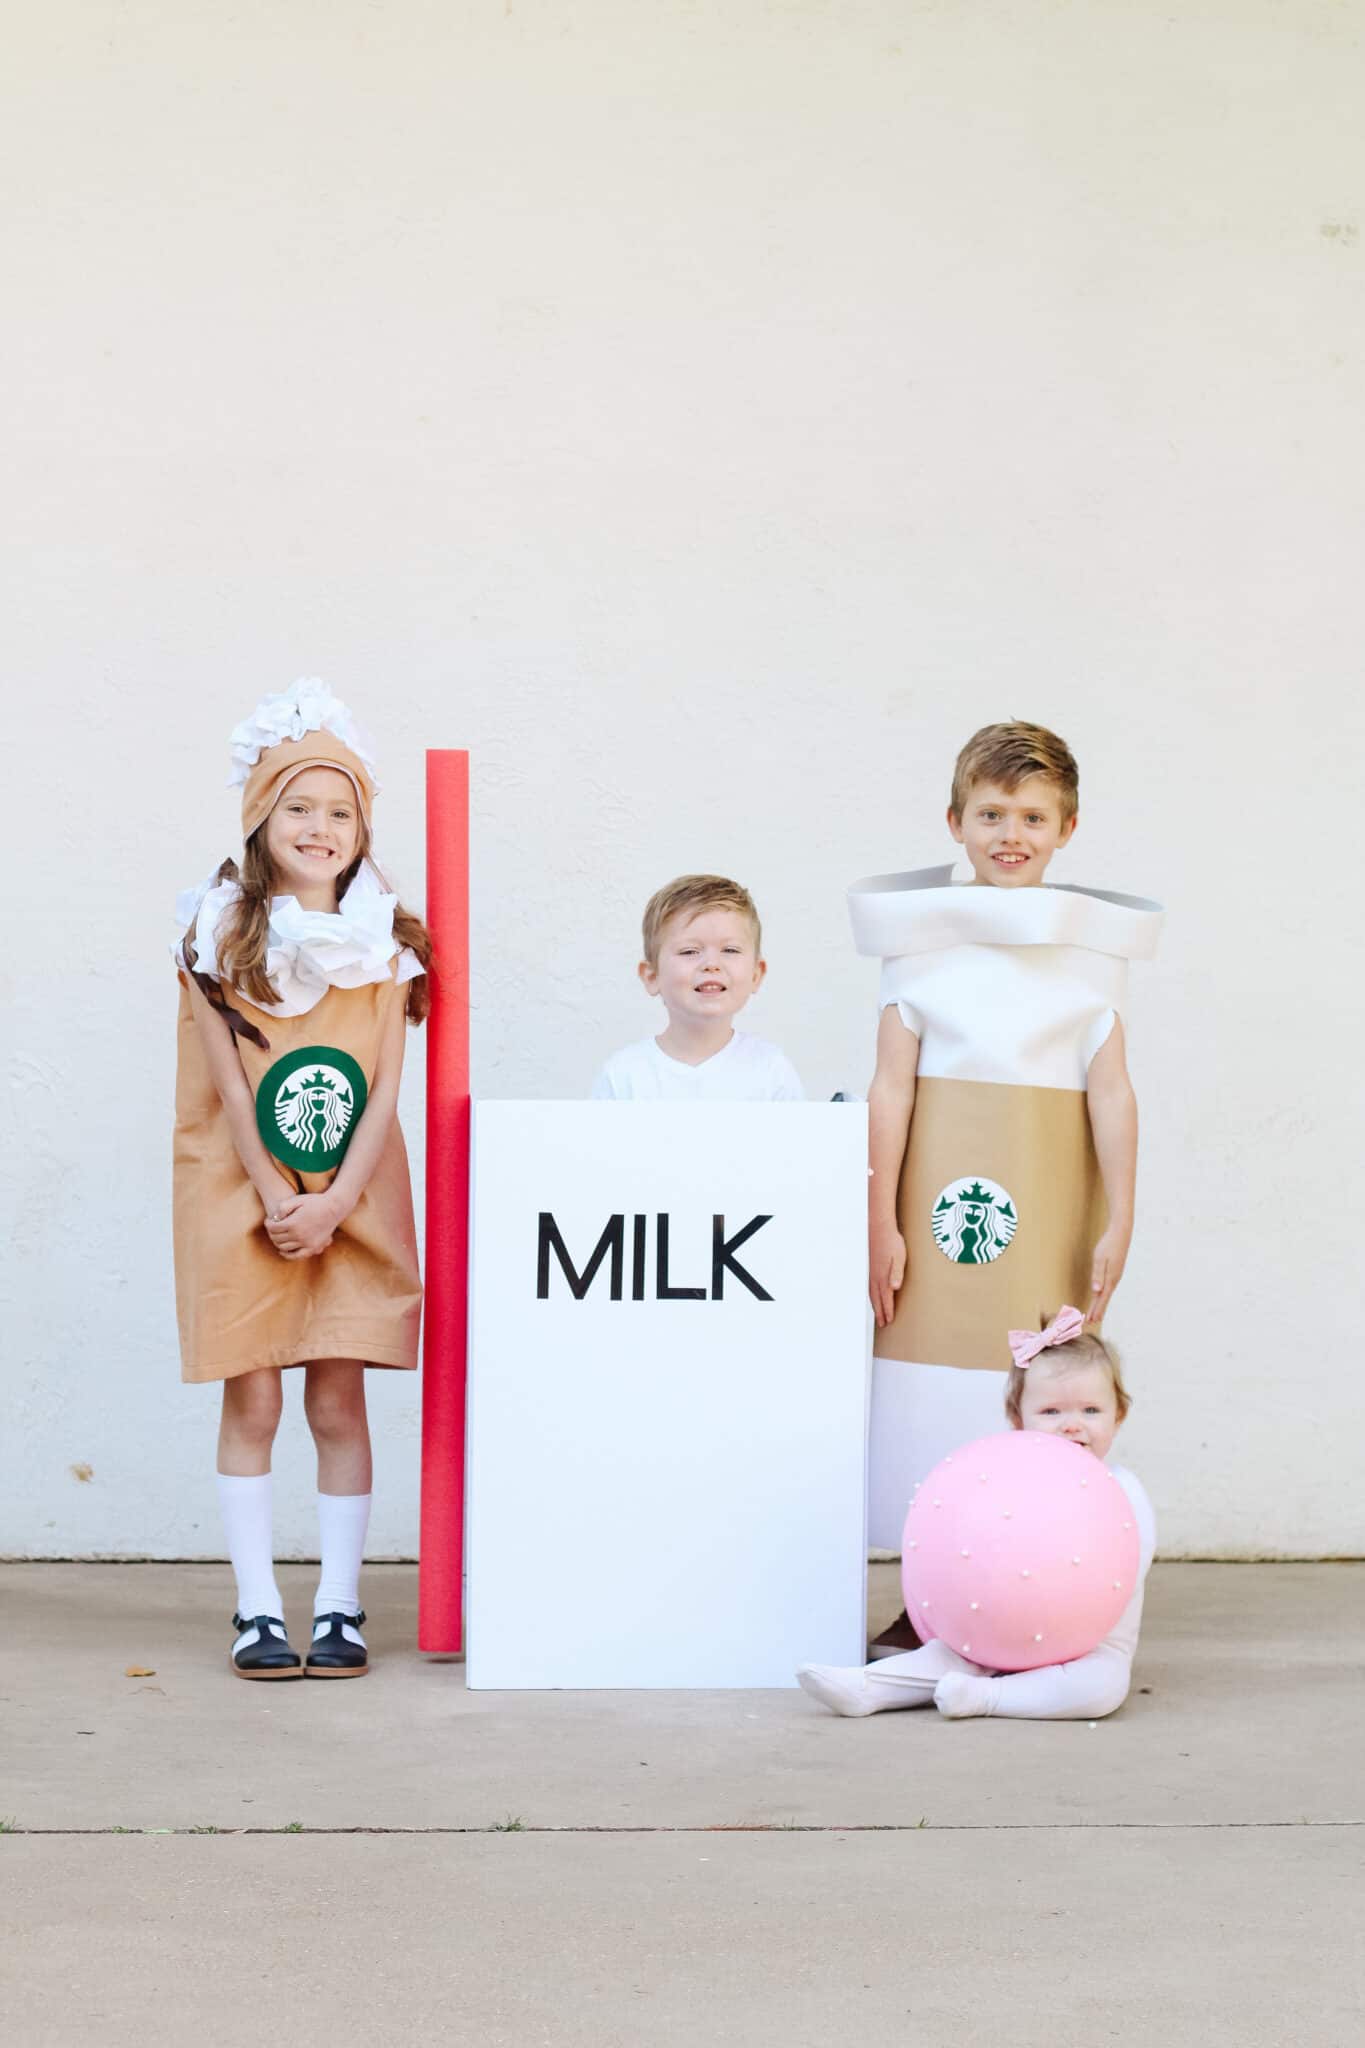 Among Us costume ideas simple enough for the whole family